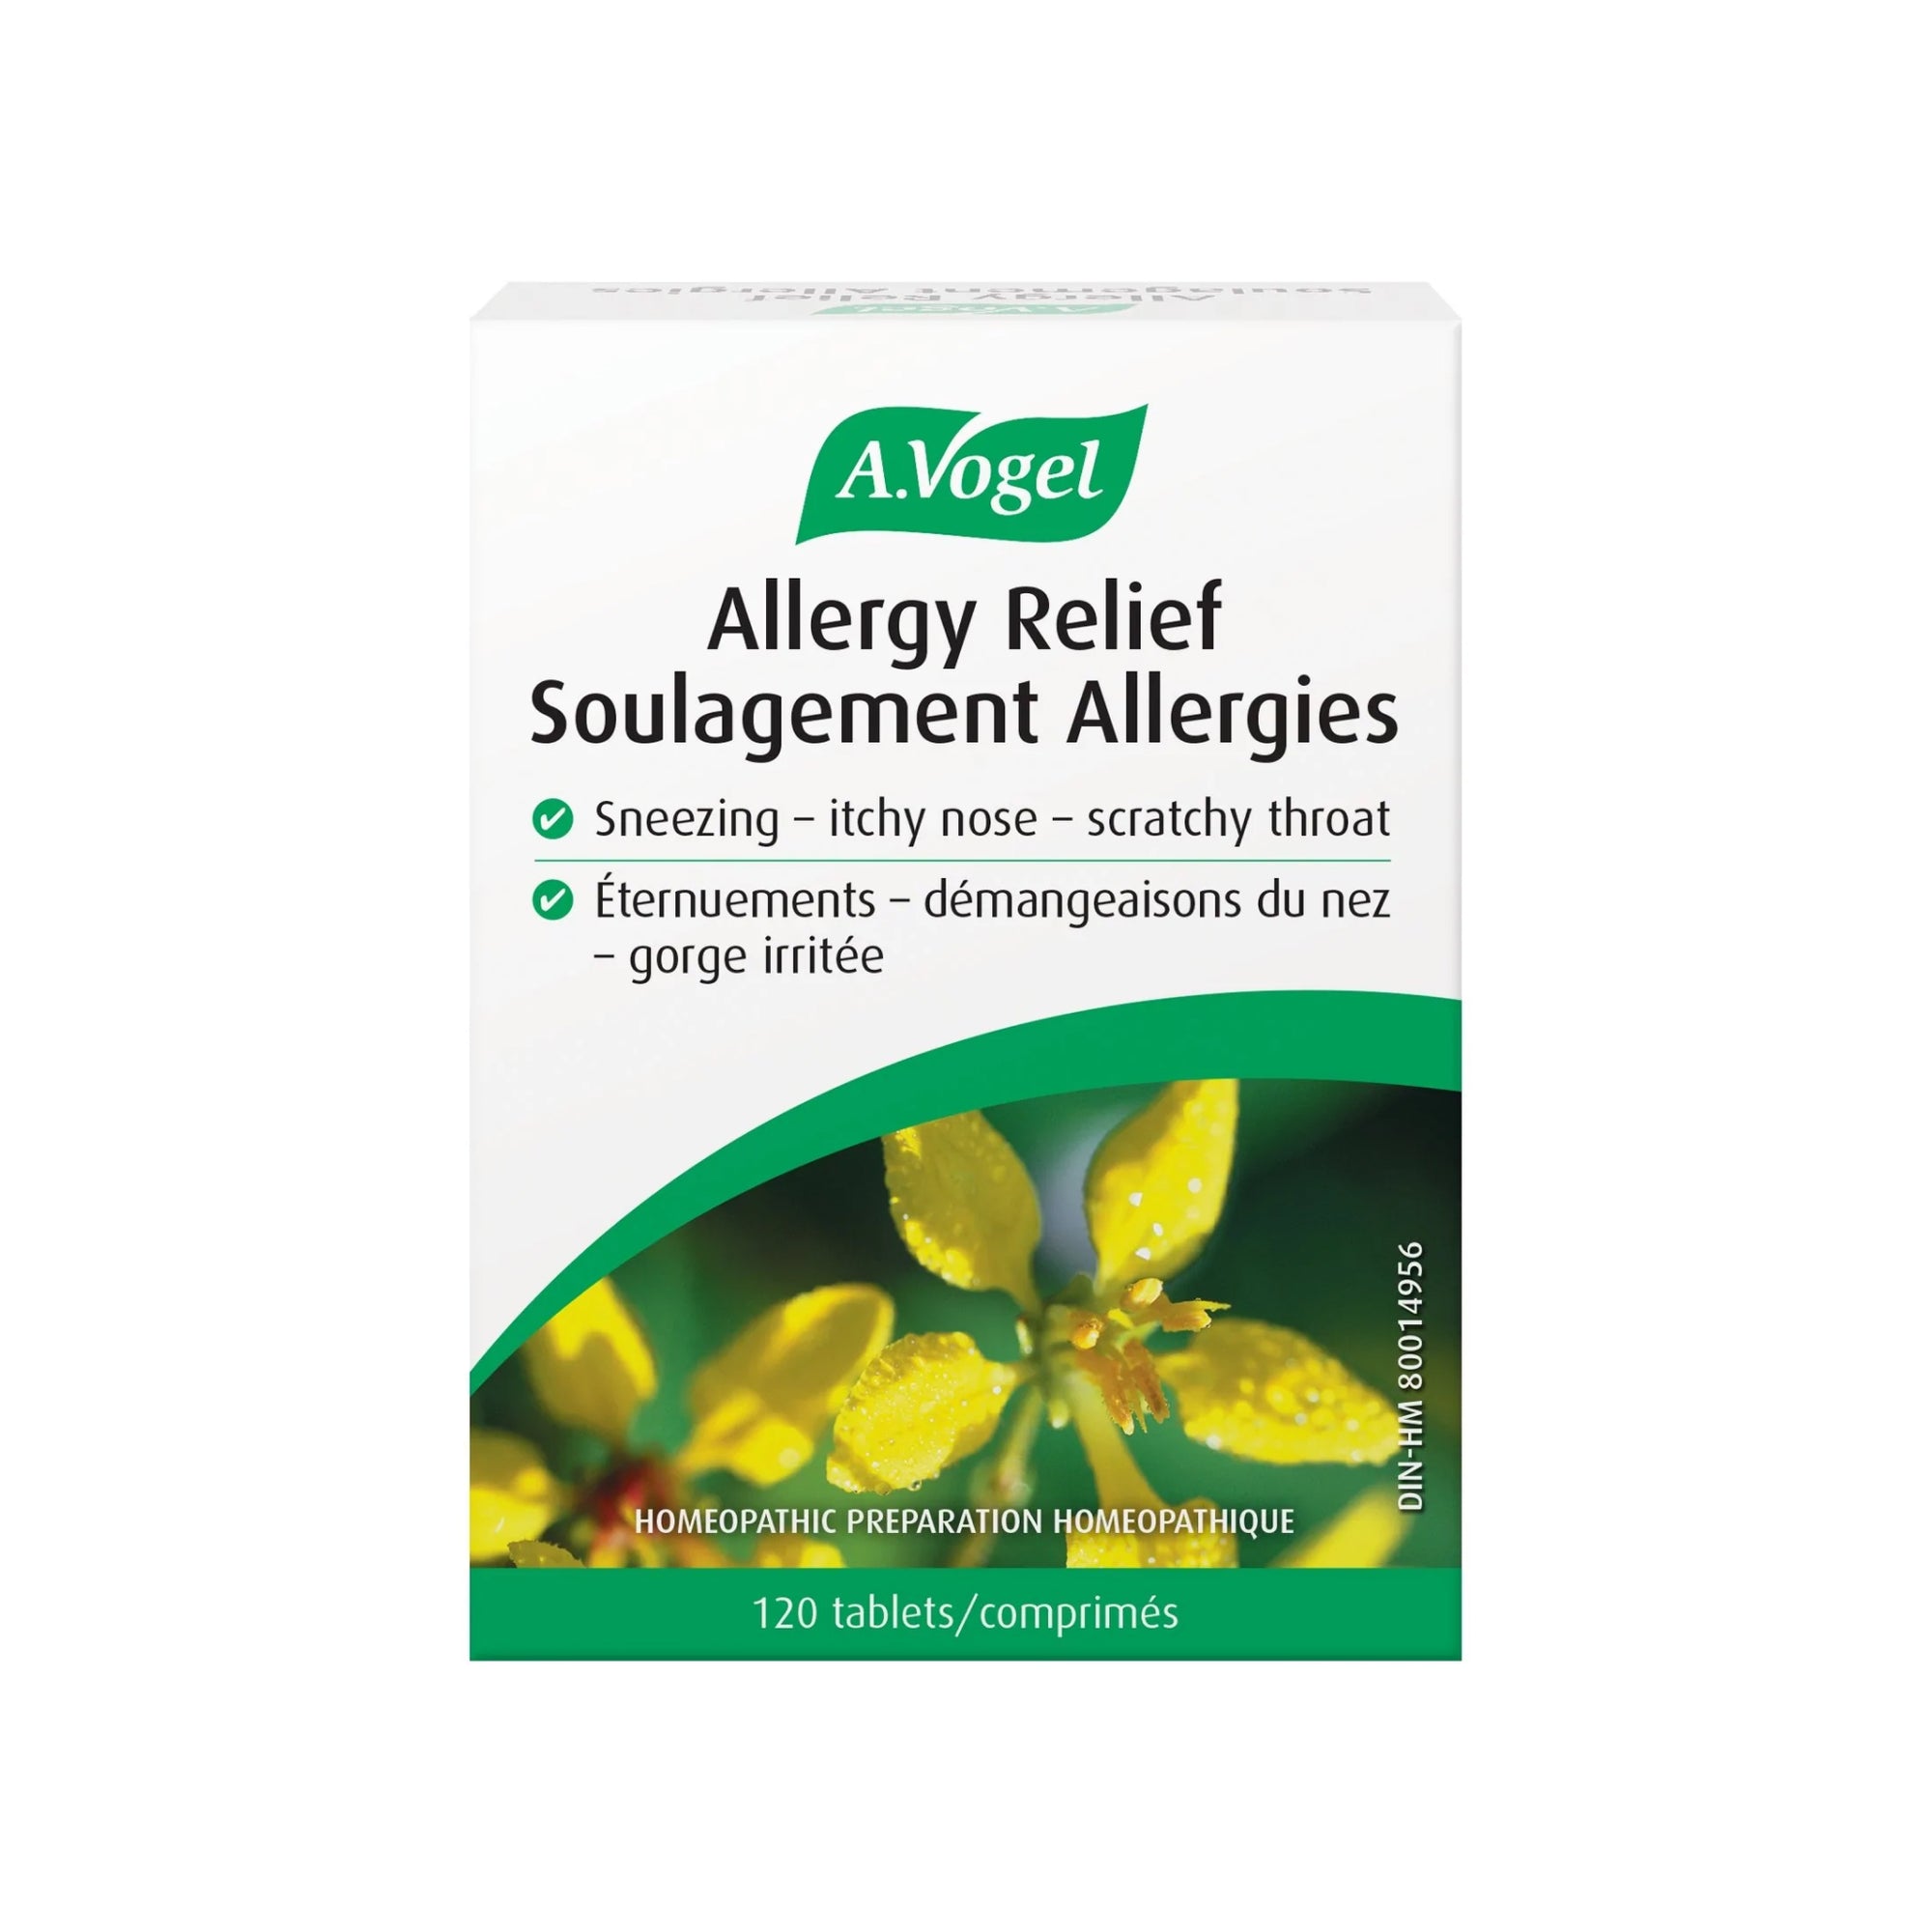 A. Vogel Allergy Relief 120s